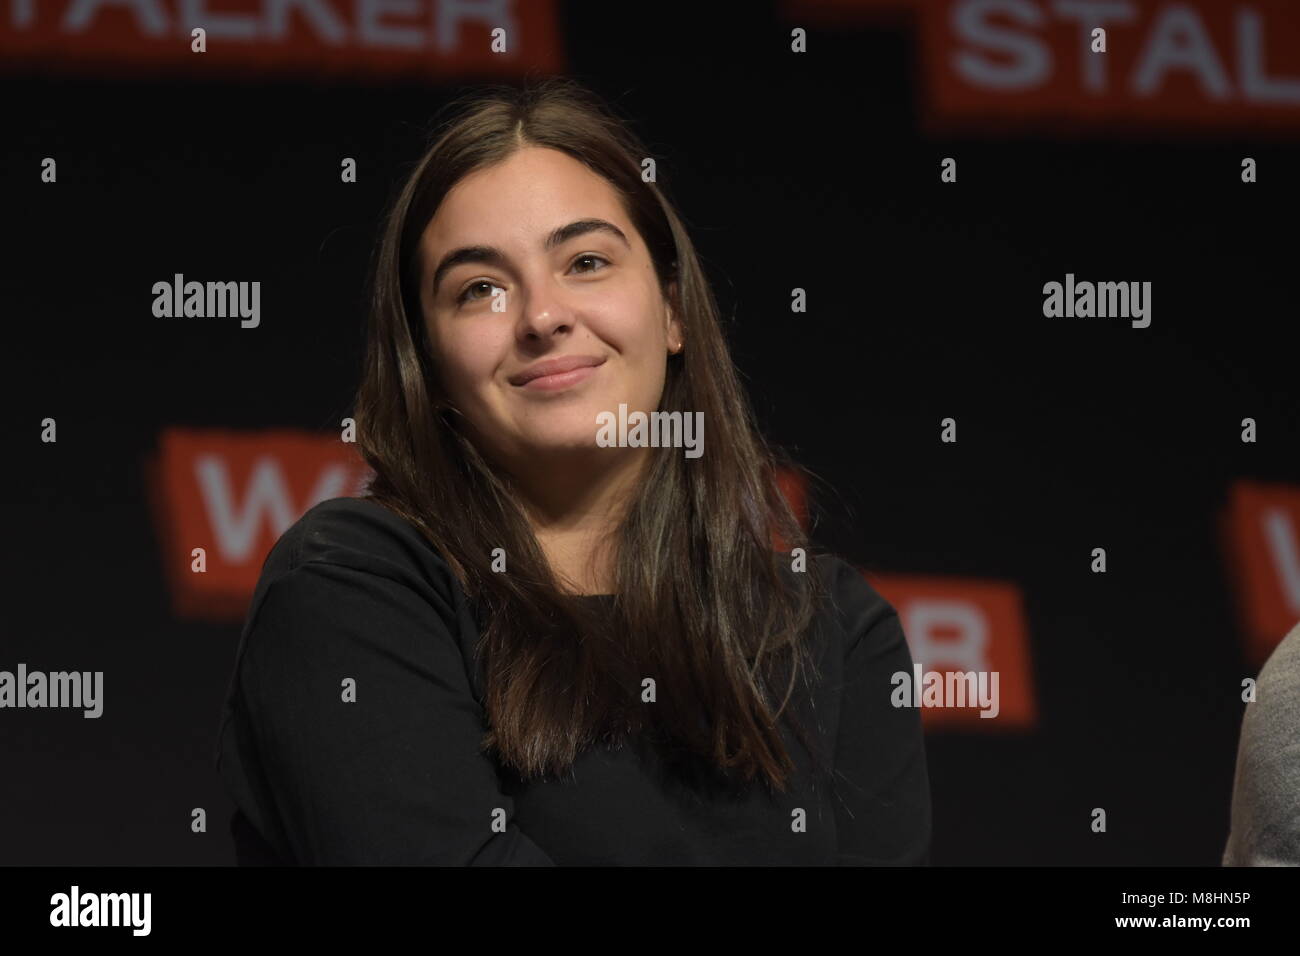 MANNHEIM, GERMANY - MARCH 17: Actress Alanna Masterson (Tara on The Walking Dead) at the Walker Stalker Germany convention. (Photo by Markus Wissmann) Stock Photo